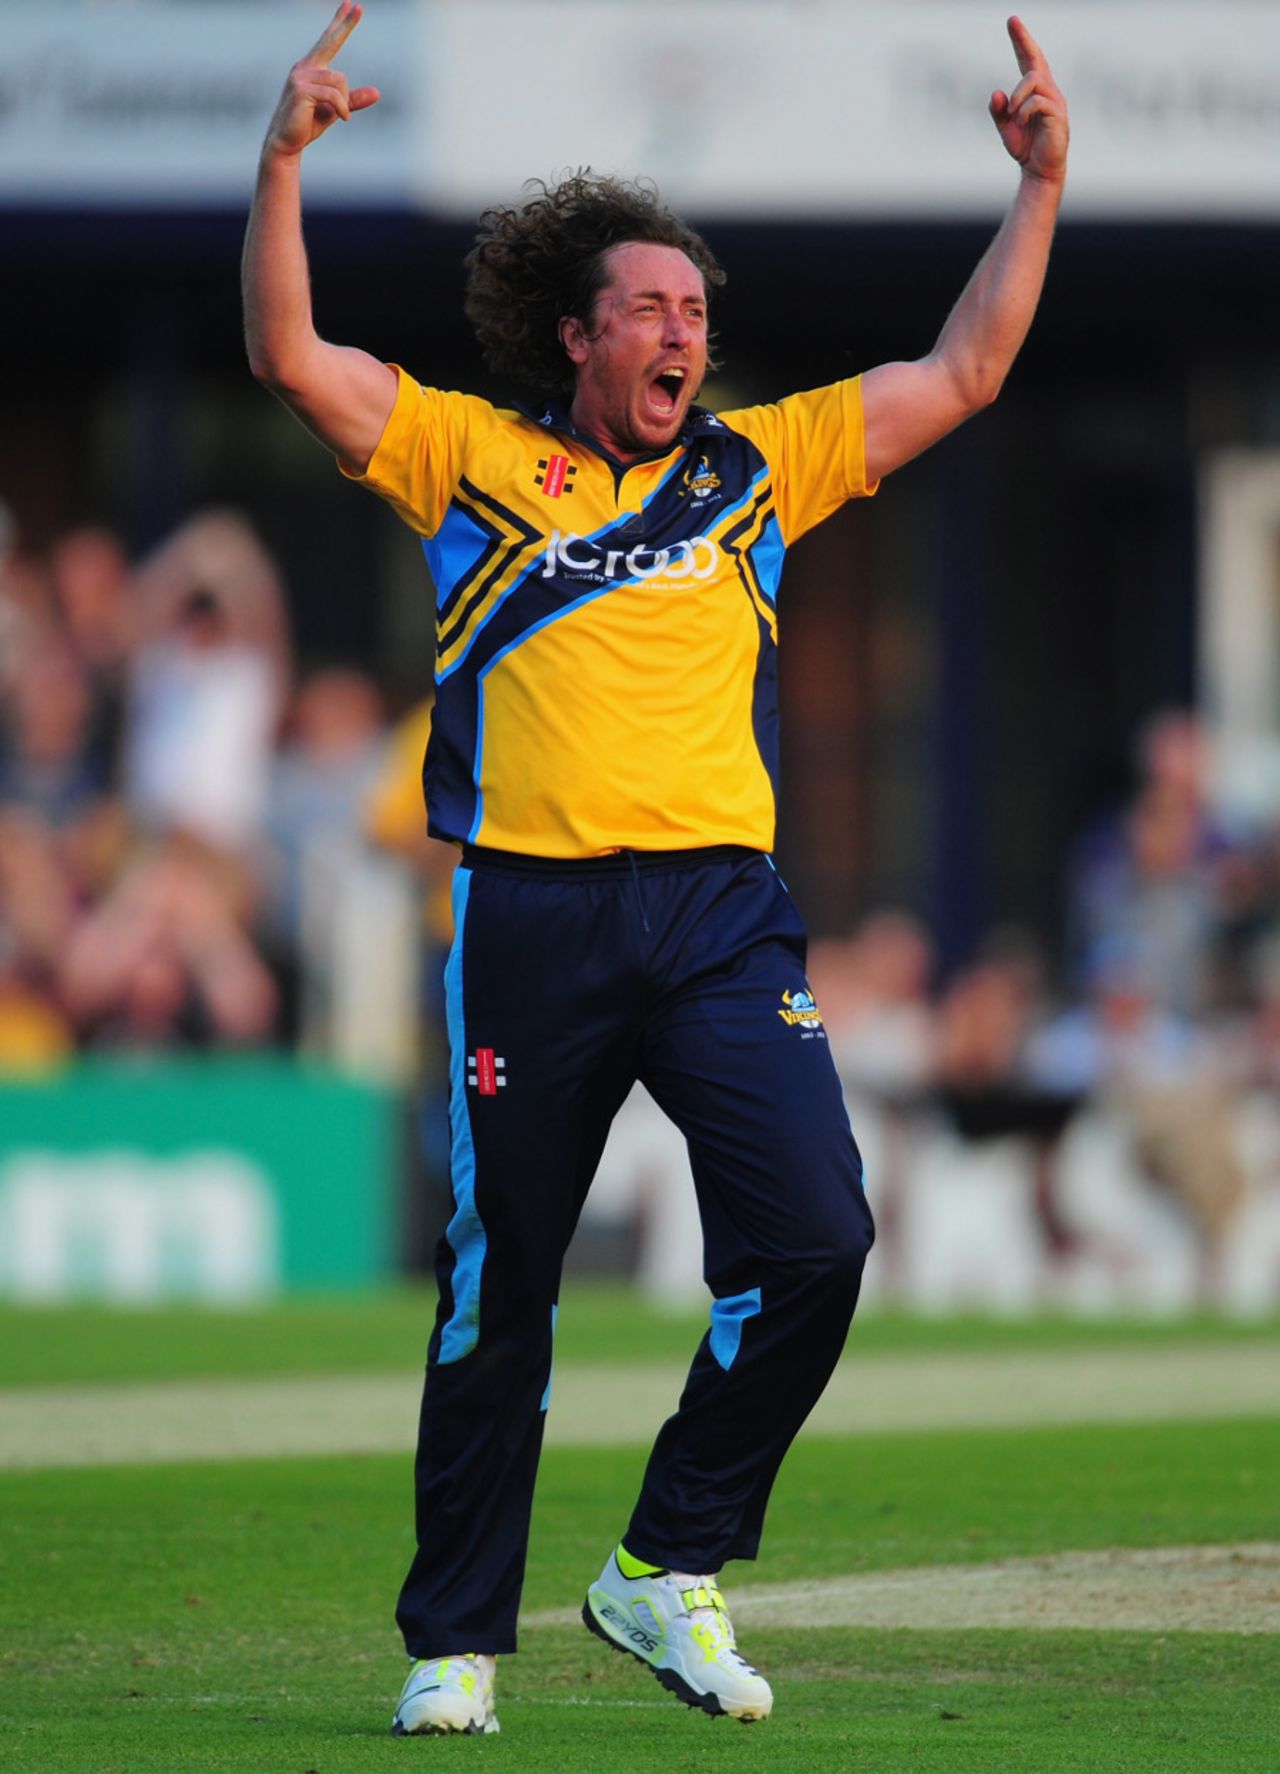 Ryan Sidebottom shows his emotions as the Roses match is tied, Yorkshire v Lancashire, FLt20, North Group, Headingley, July 5, 2013